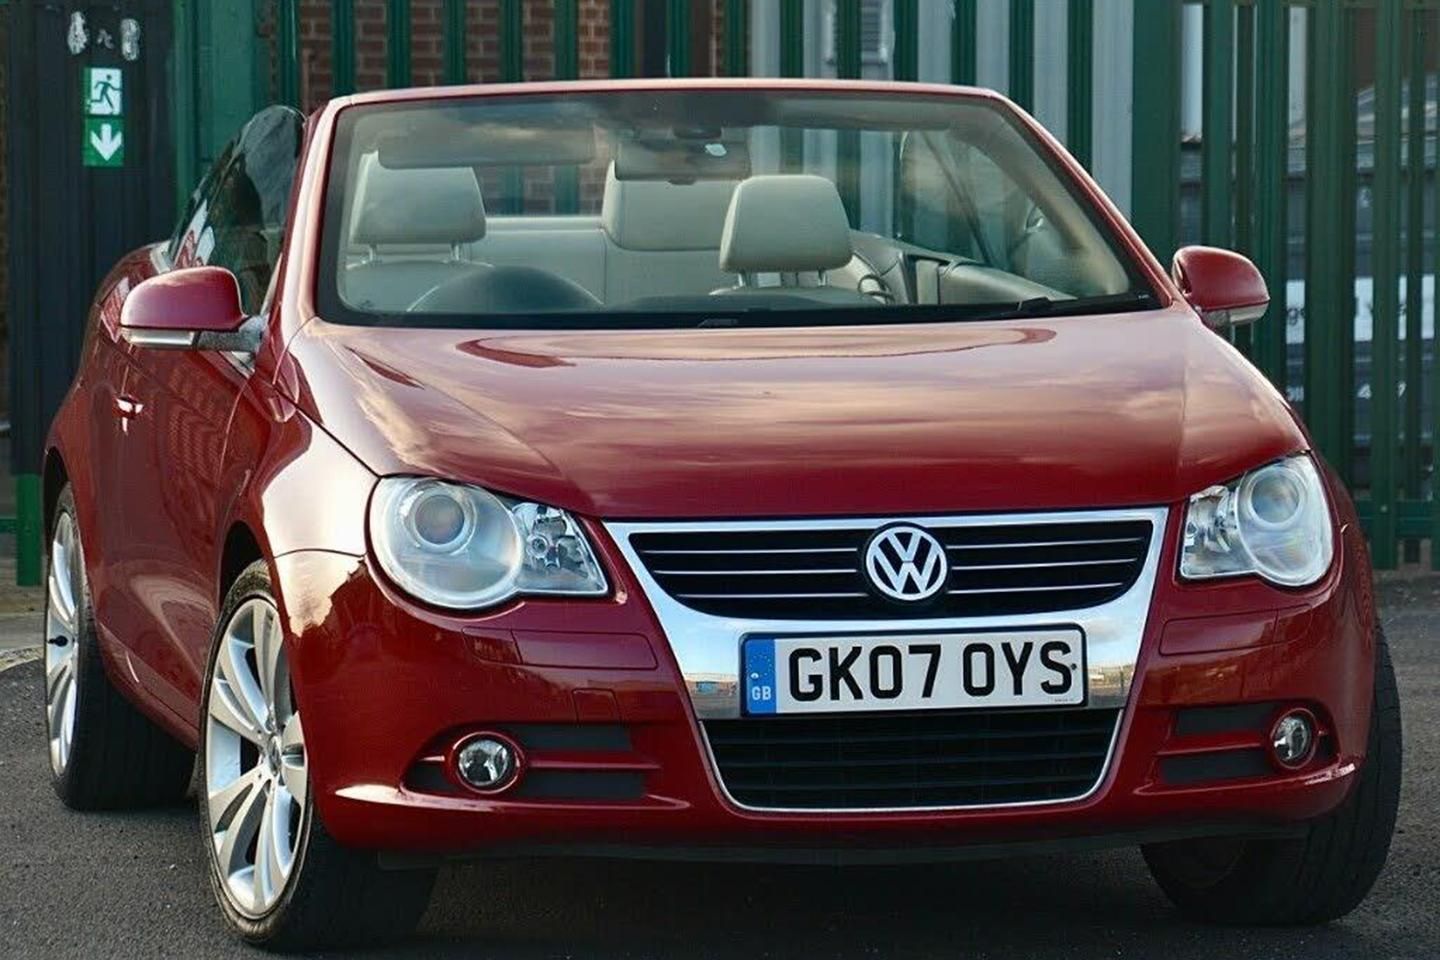 2012 Volkswagen Eos Reviews, Insights, and Specs